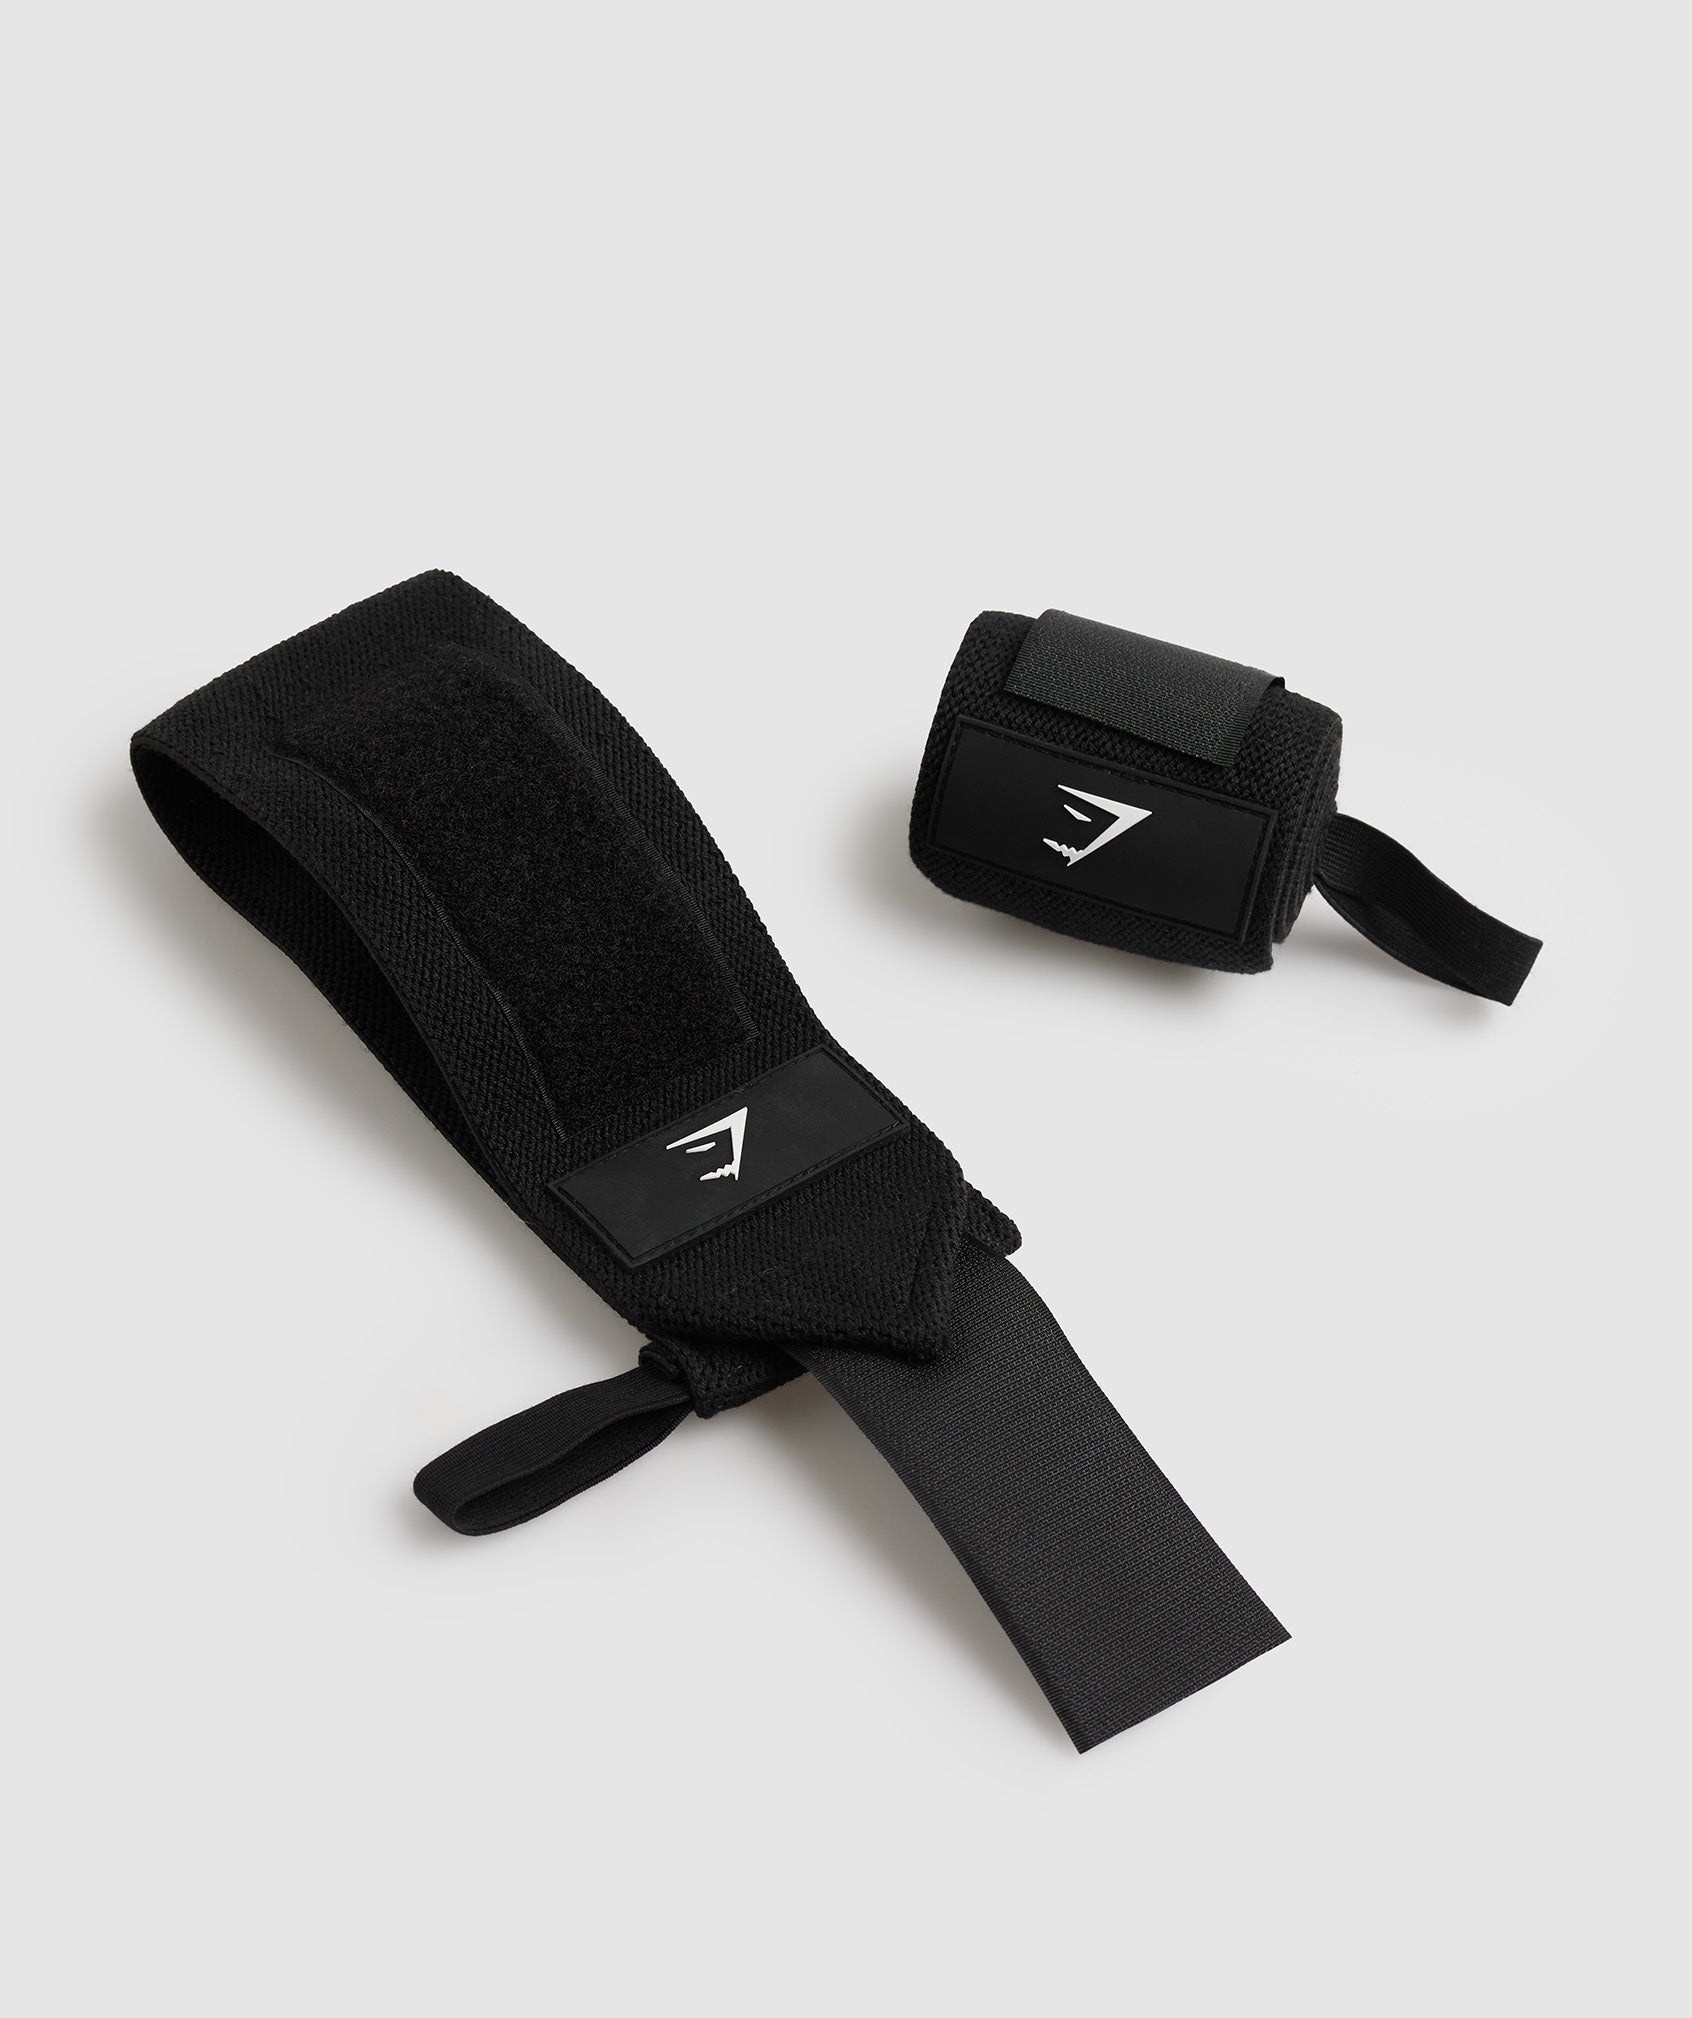 gymshark down to the wrist wraps > countdown is ON to lift